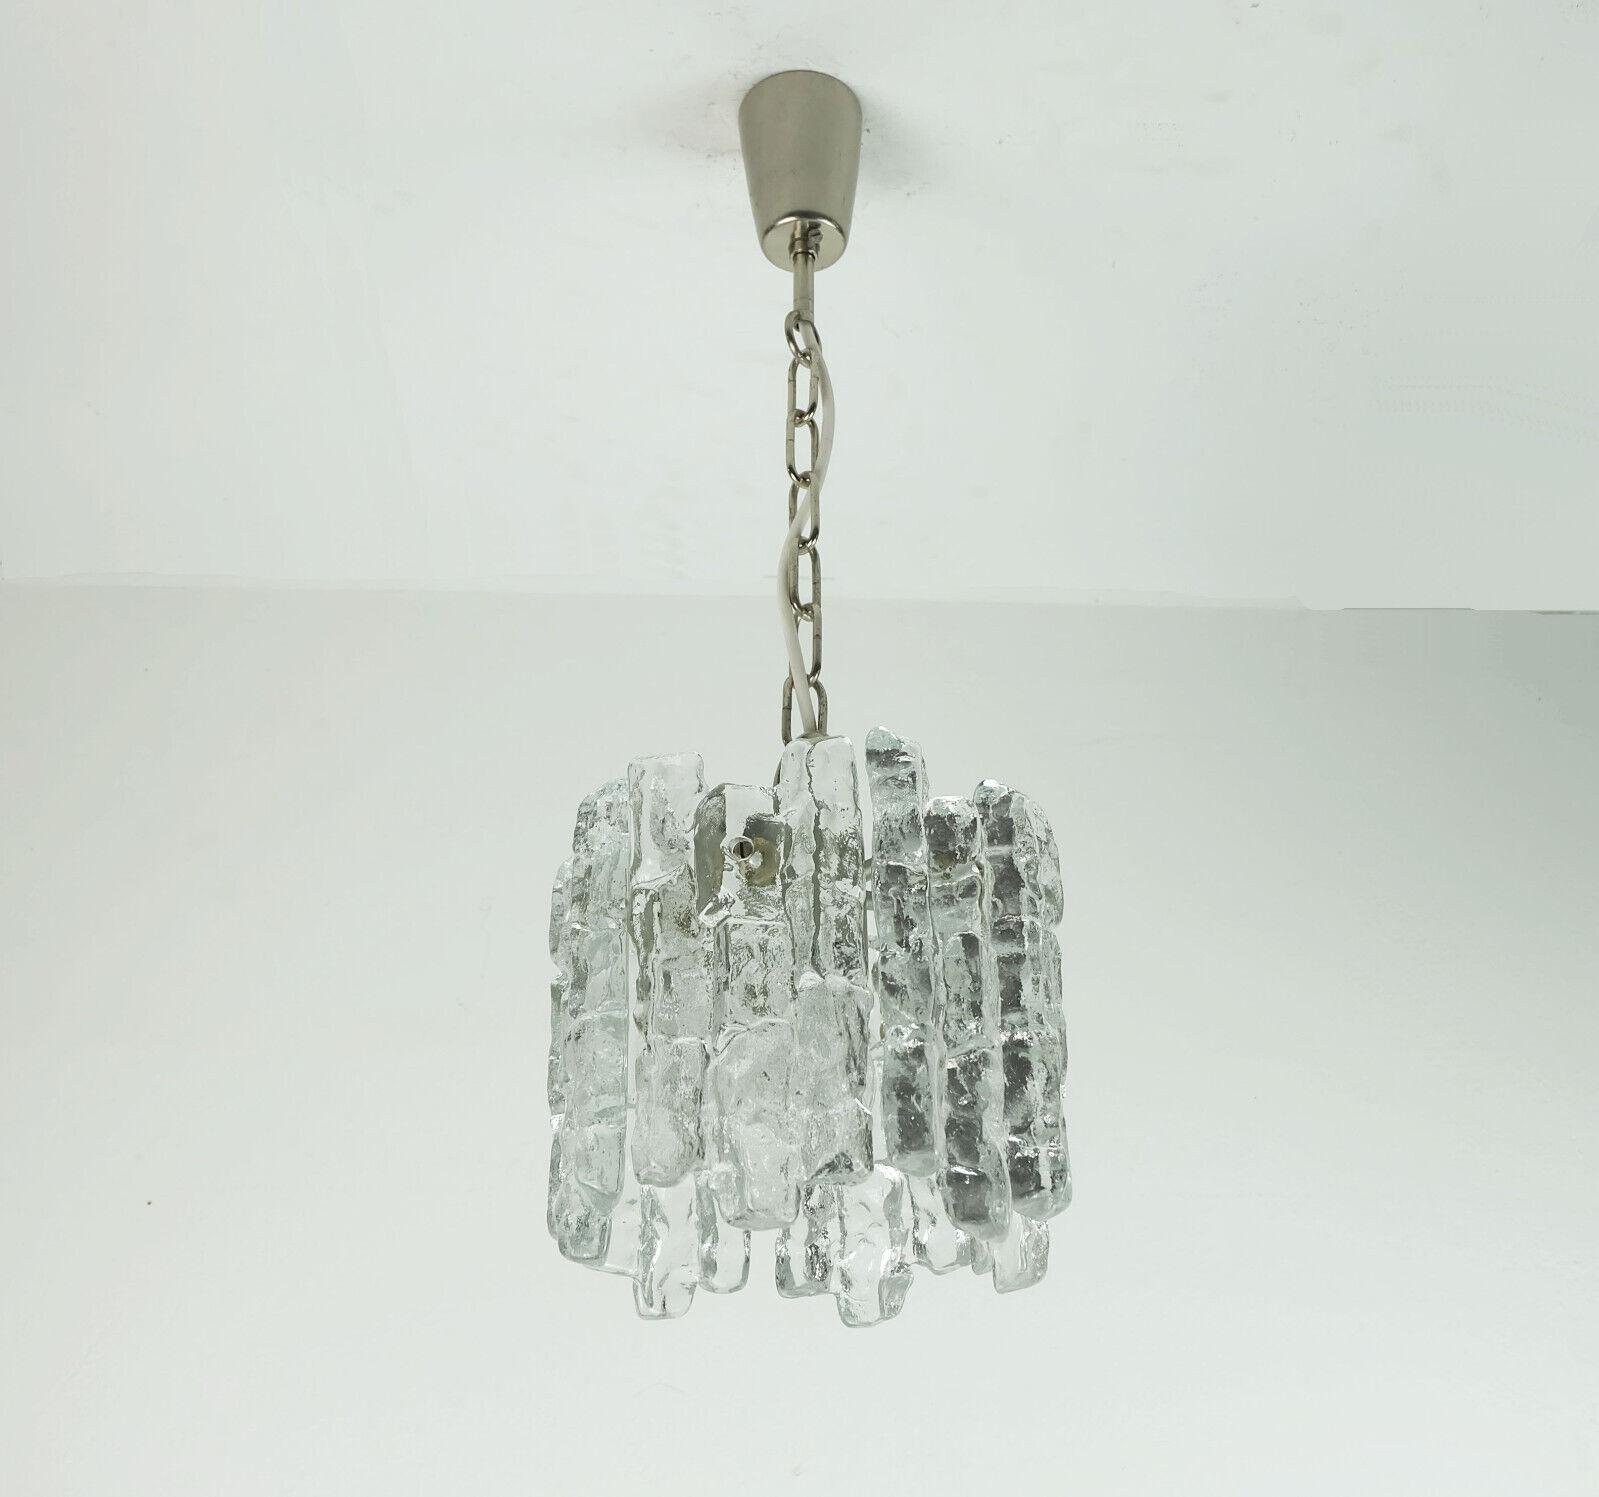 Mid century pendant light manufactured in the 1960s / 70s by Kalmar Franken (model 3379/1, series 1/6/7/8). The shade consists of 6 individual elements made of thick structured glass in an ice look, which are attached to a silver-colored metal